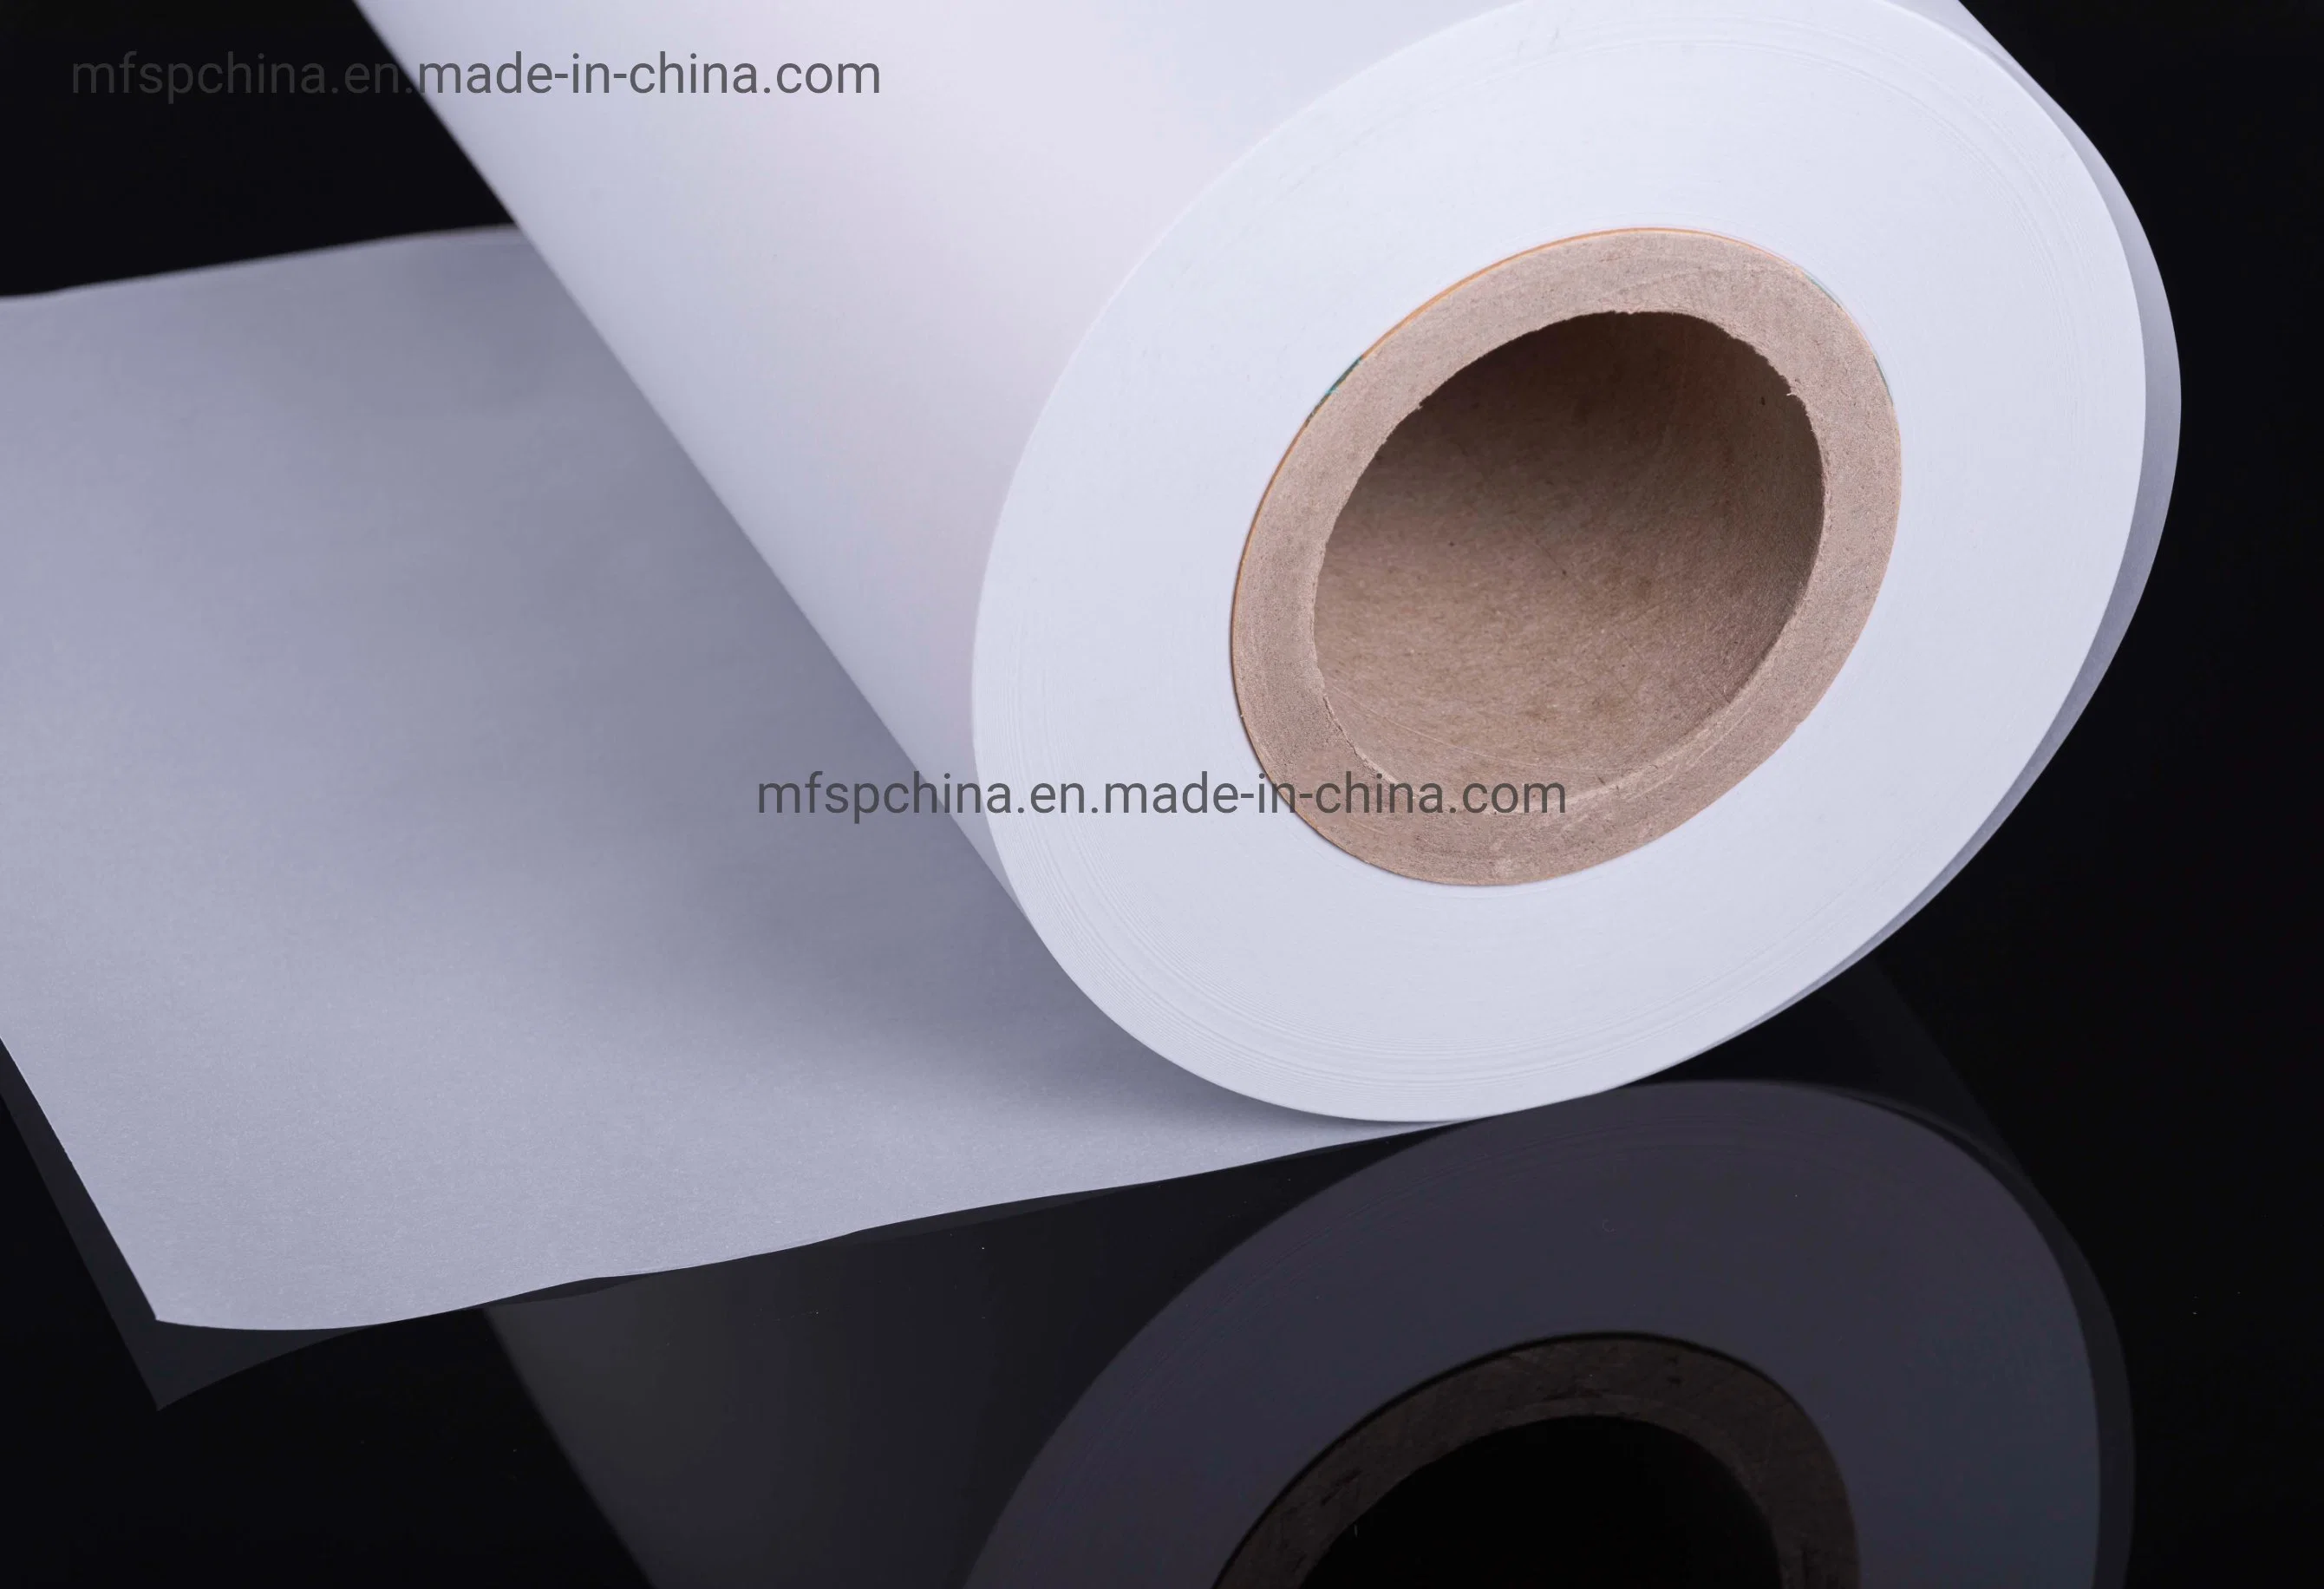 100g Translucent Paper for Wrapping Phone, Pad, Notebook, Charger Digital Consumables